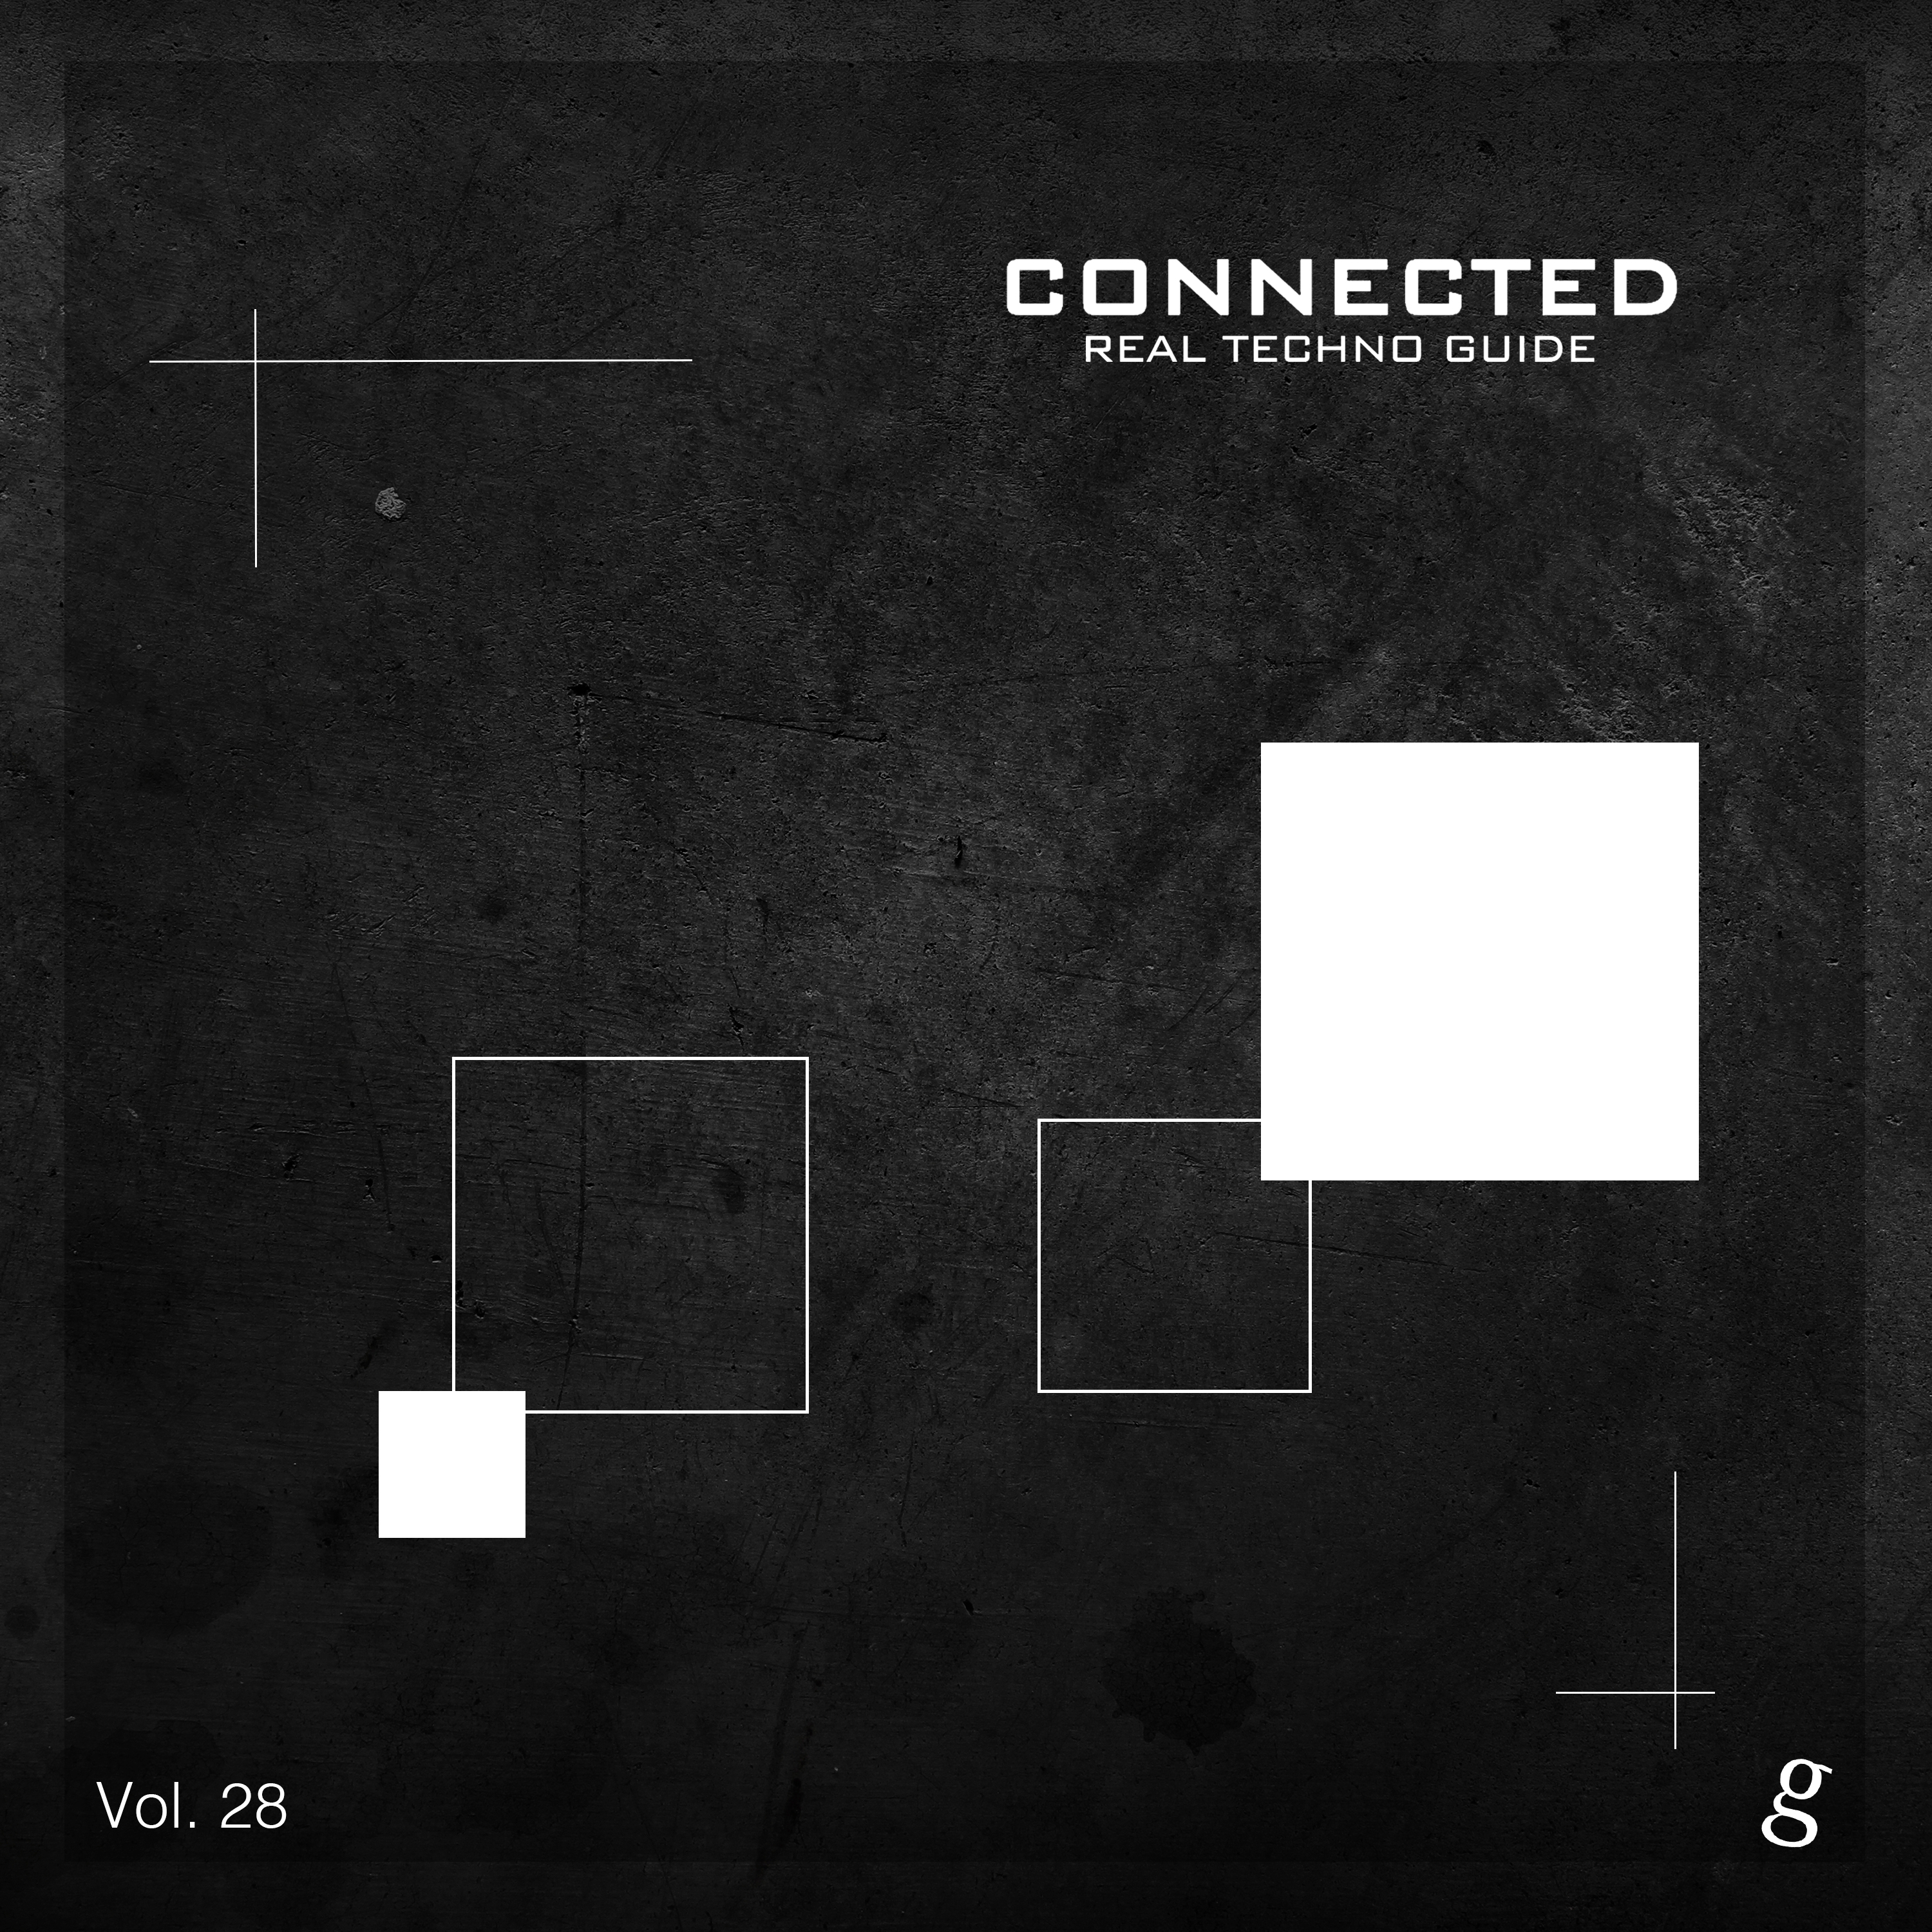 Connected, Vol. 28 - Real Techno Guide